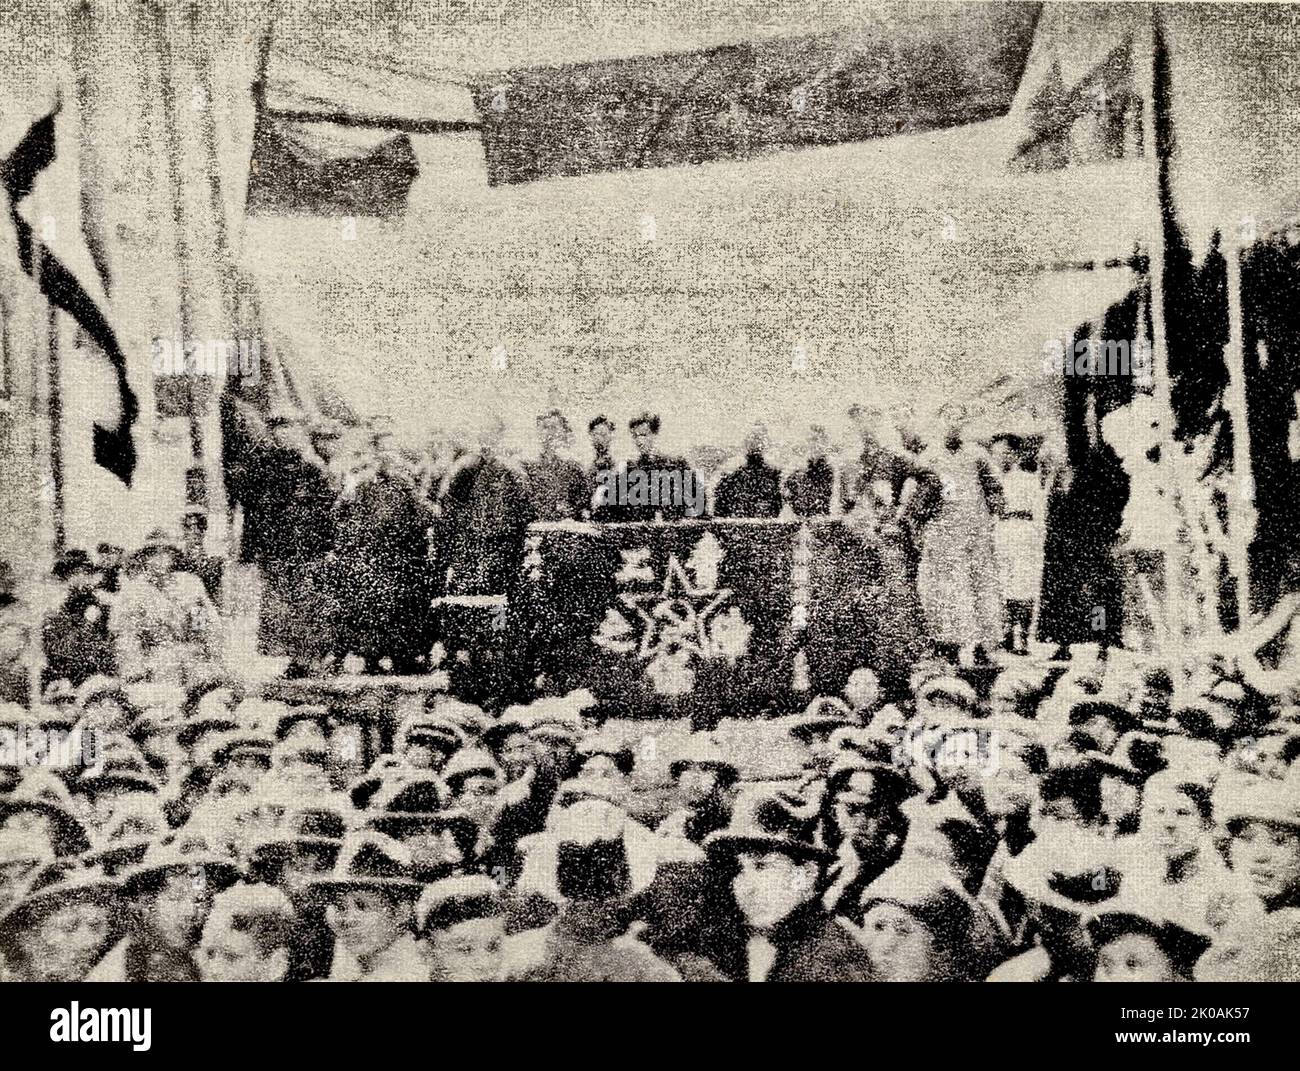 Young Workers Rally celebrates victory. The rally rendered victorious in the Third Armed uprising, a worker-based uprising aimed to occupy Shanghai. Stock Photo